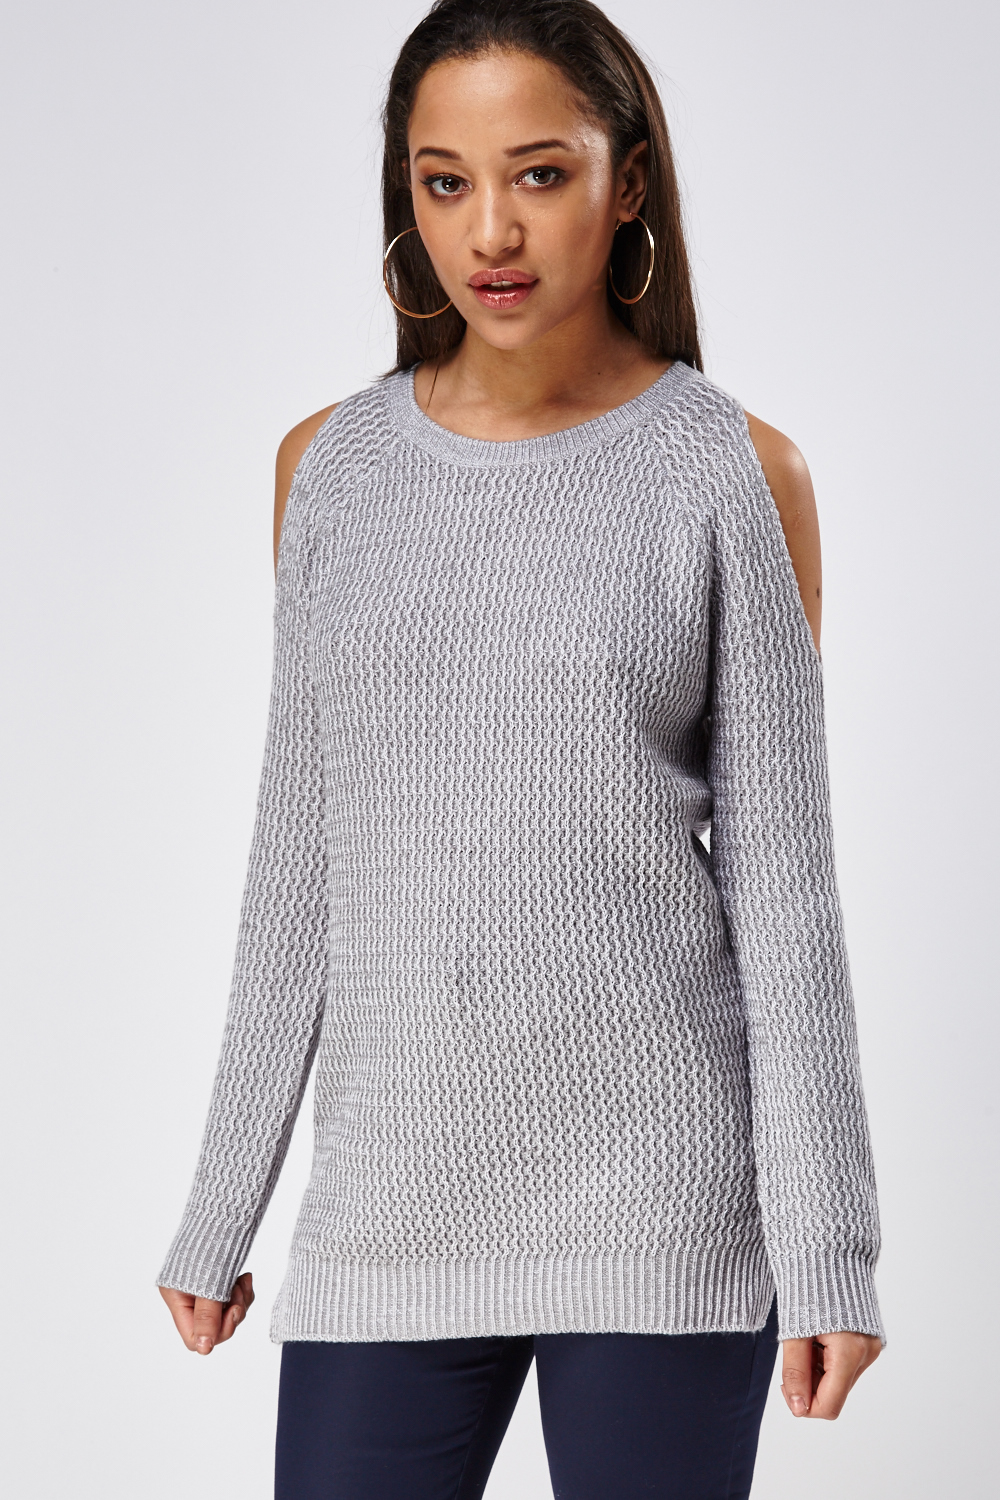 Knitted Cut Out Shoulder Jumper - Just $7